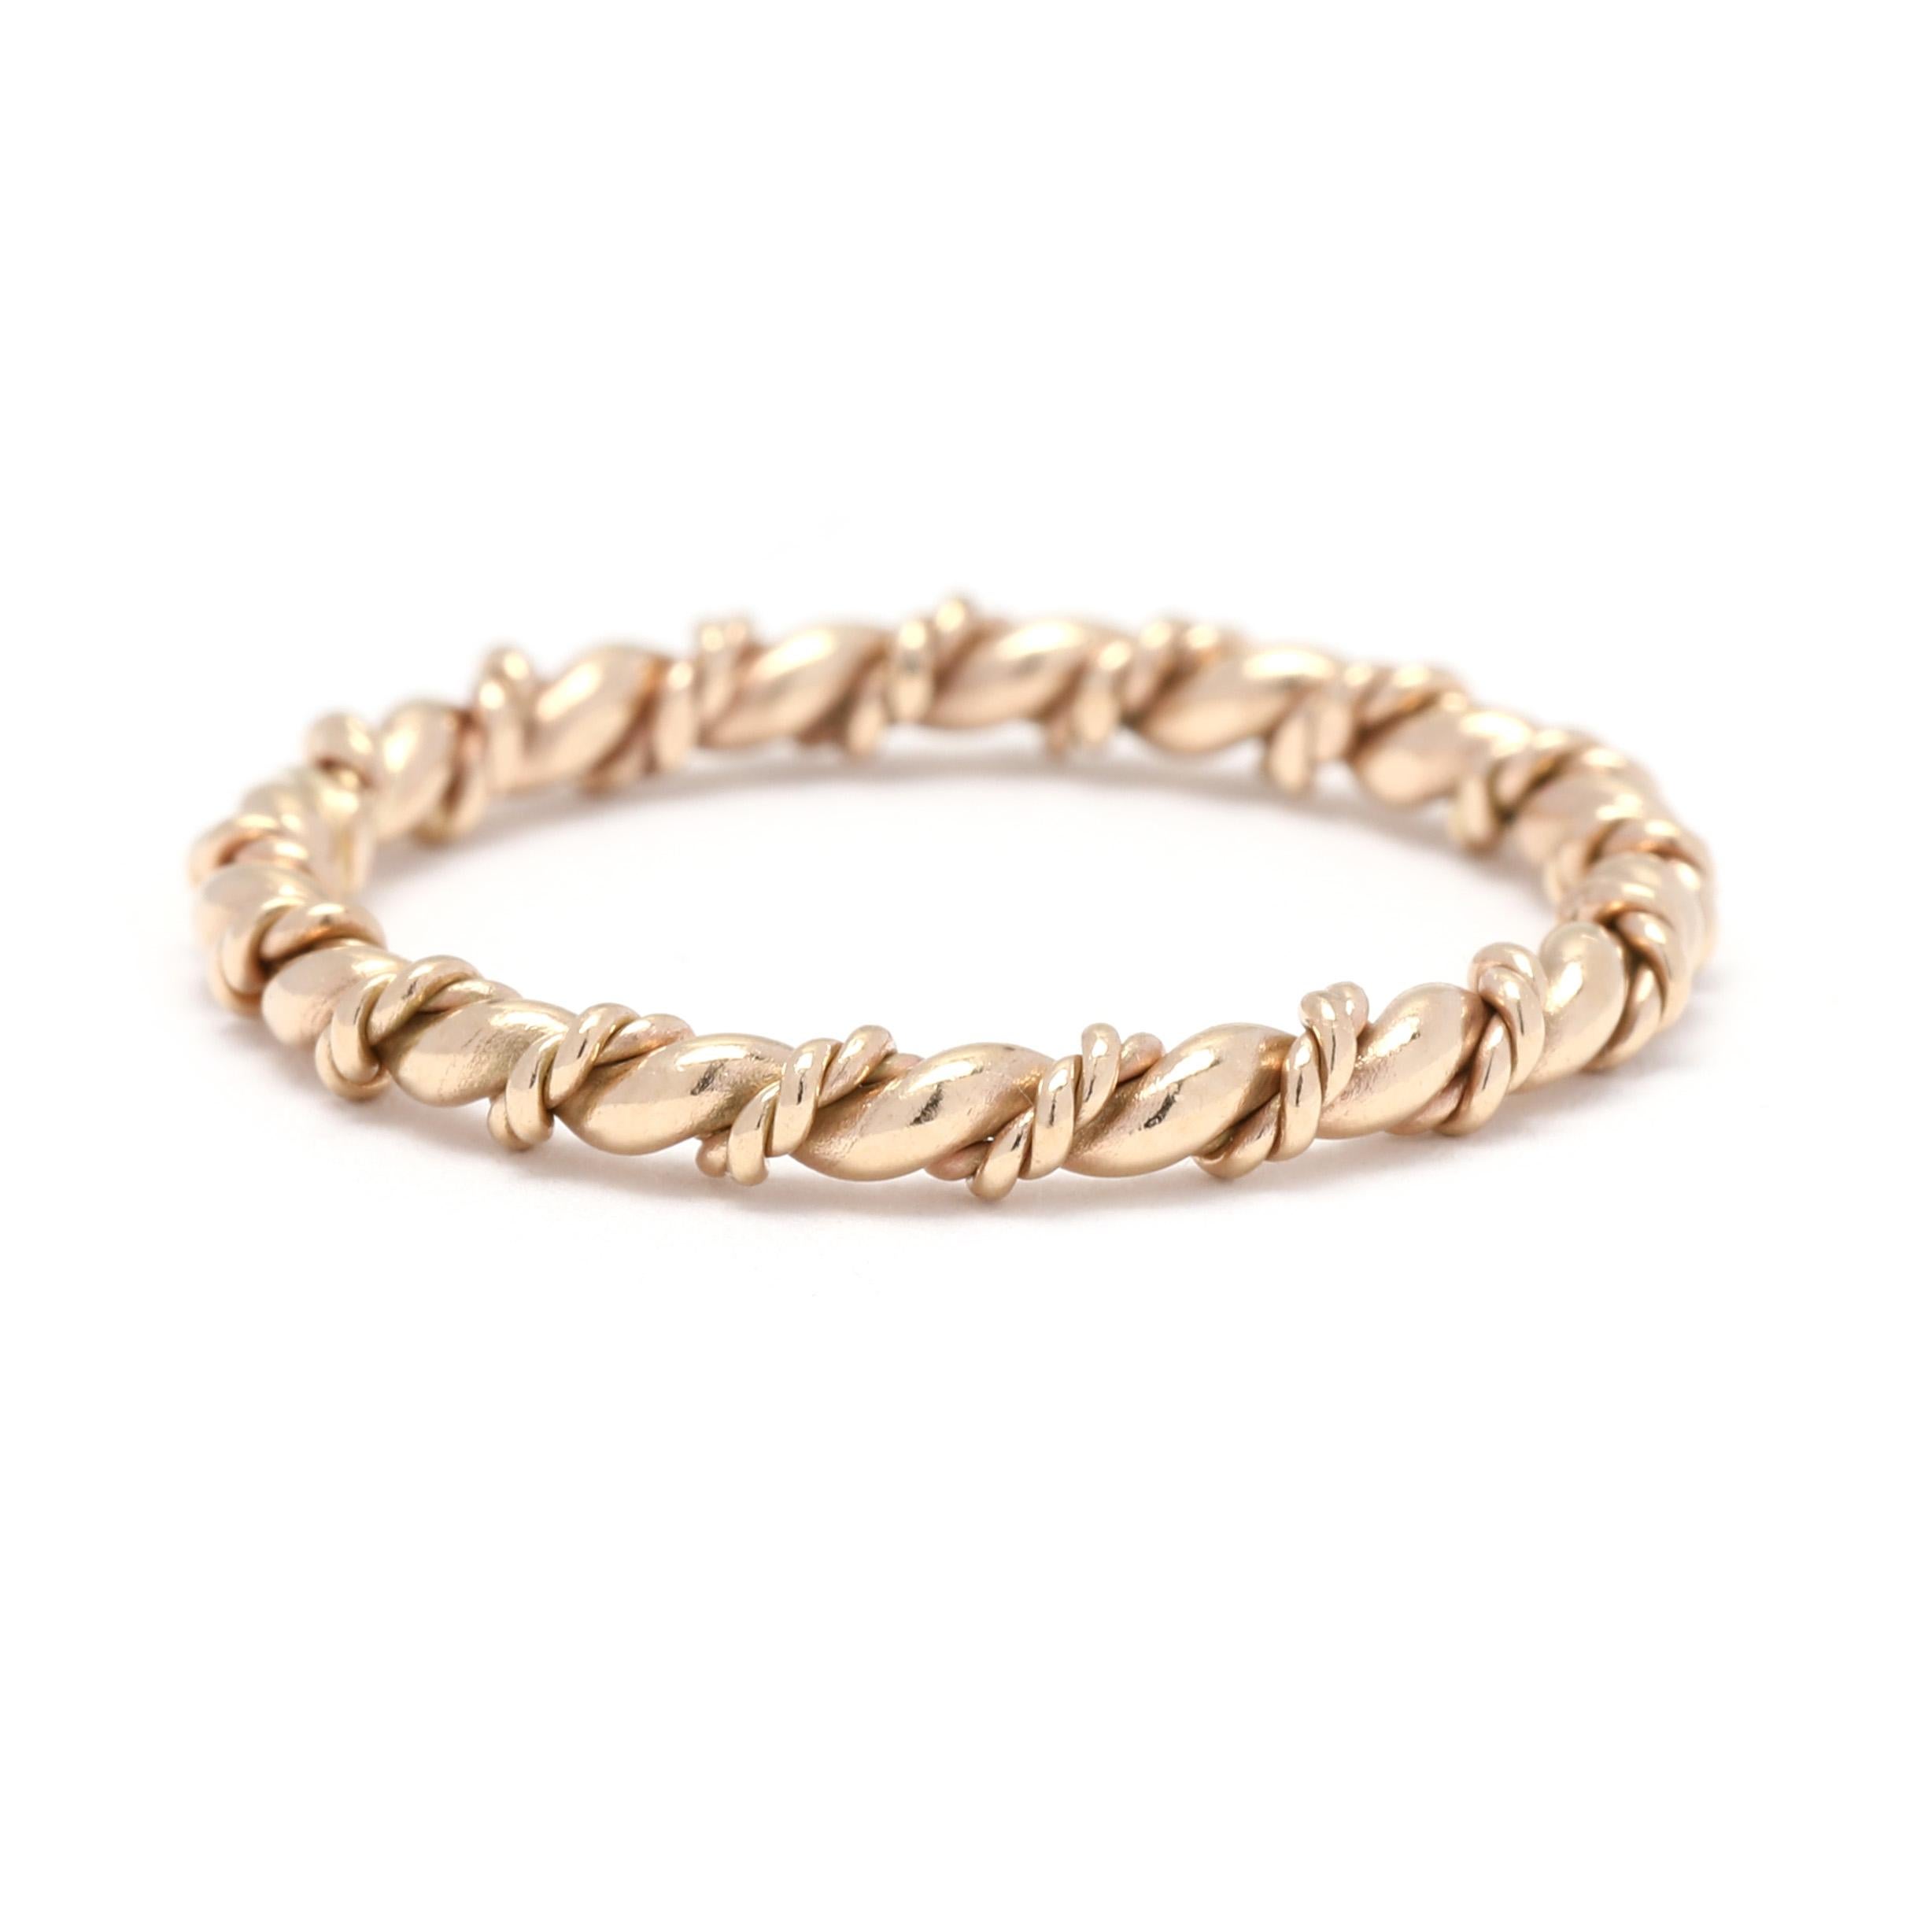 This dainty 14k yellow gold twisted rope eternity ring is the perfect addition to your ring stack. The twisted rope design adds a unique and eye-catching detail to the classic band ring. With a ring size of 5.25, this ring is perfect for stacking